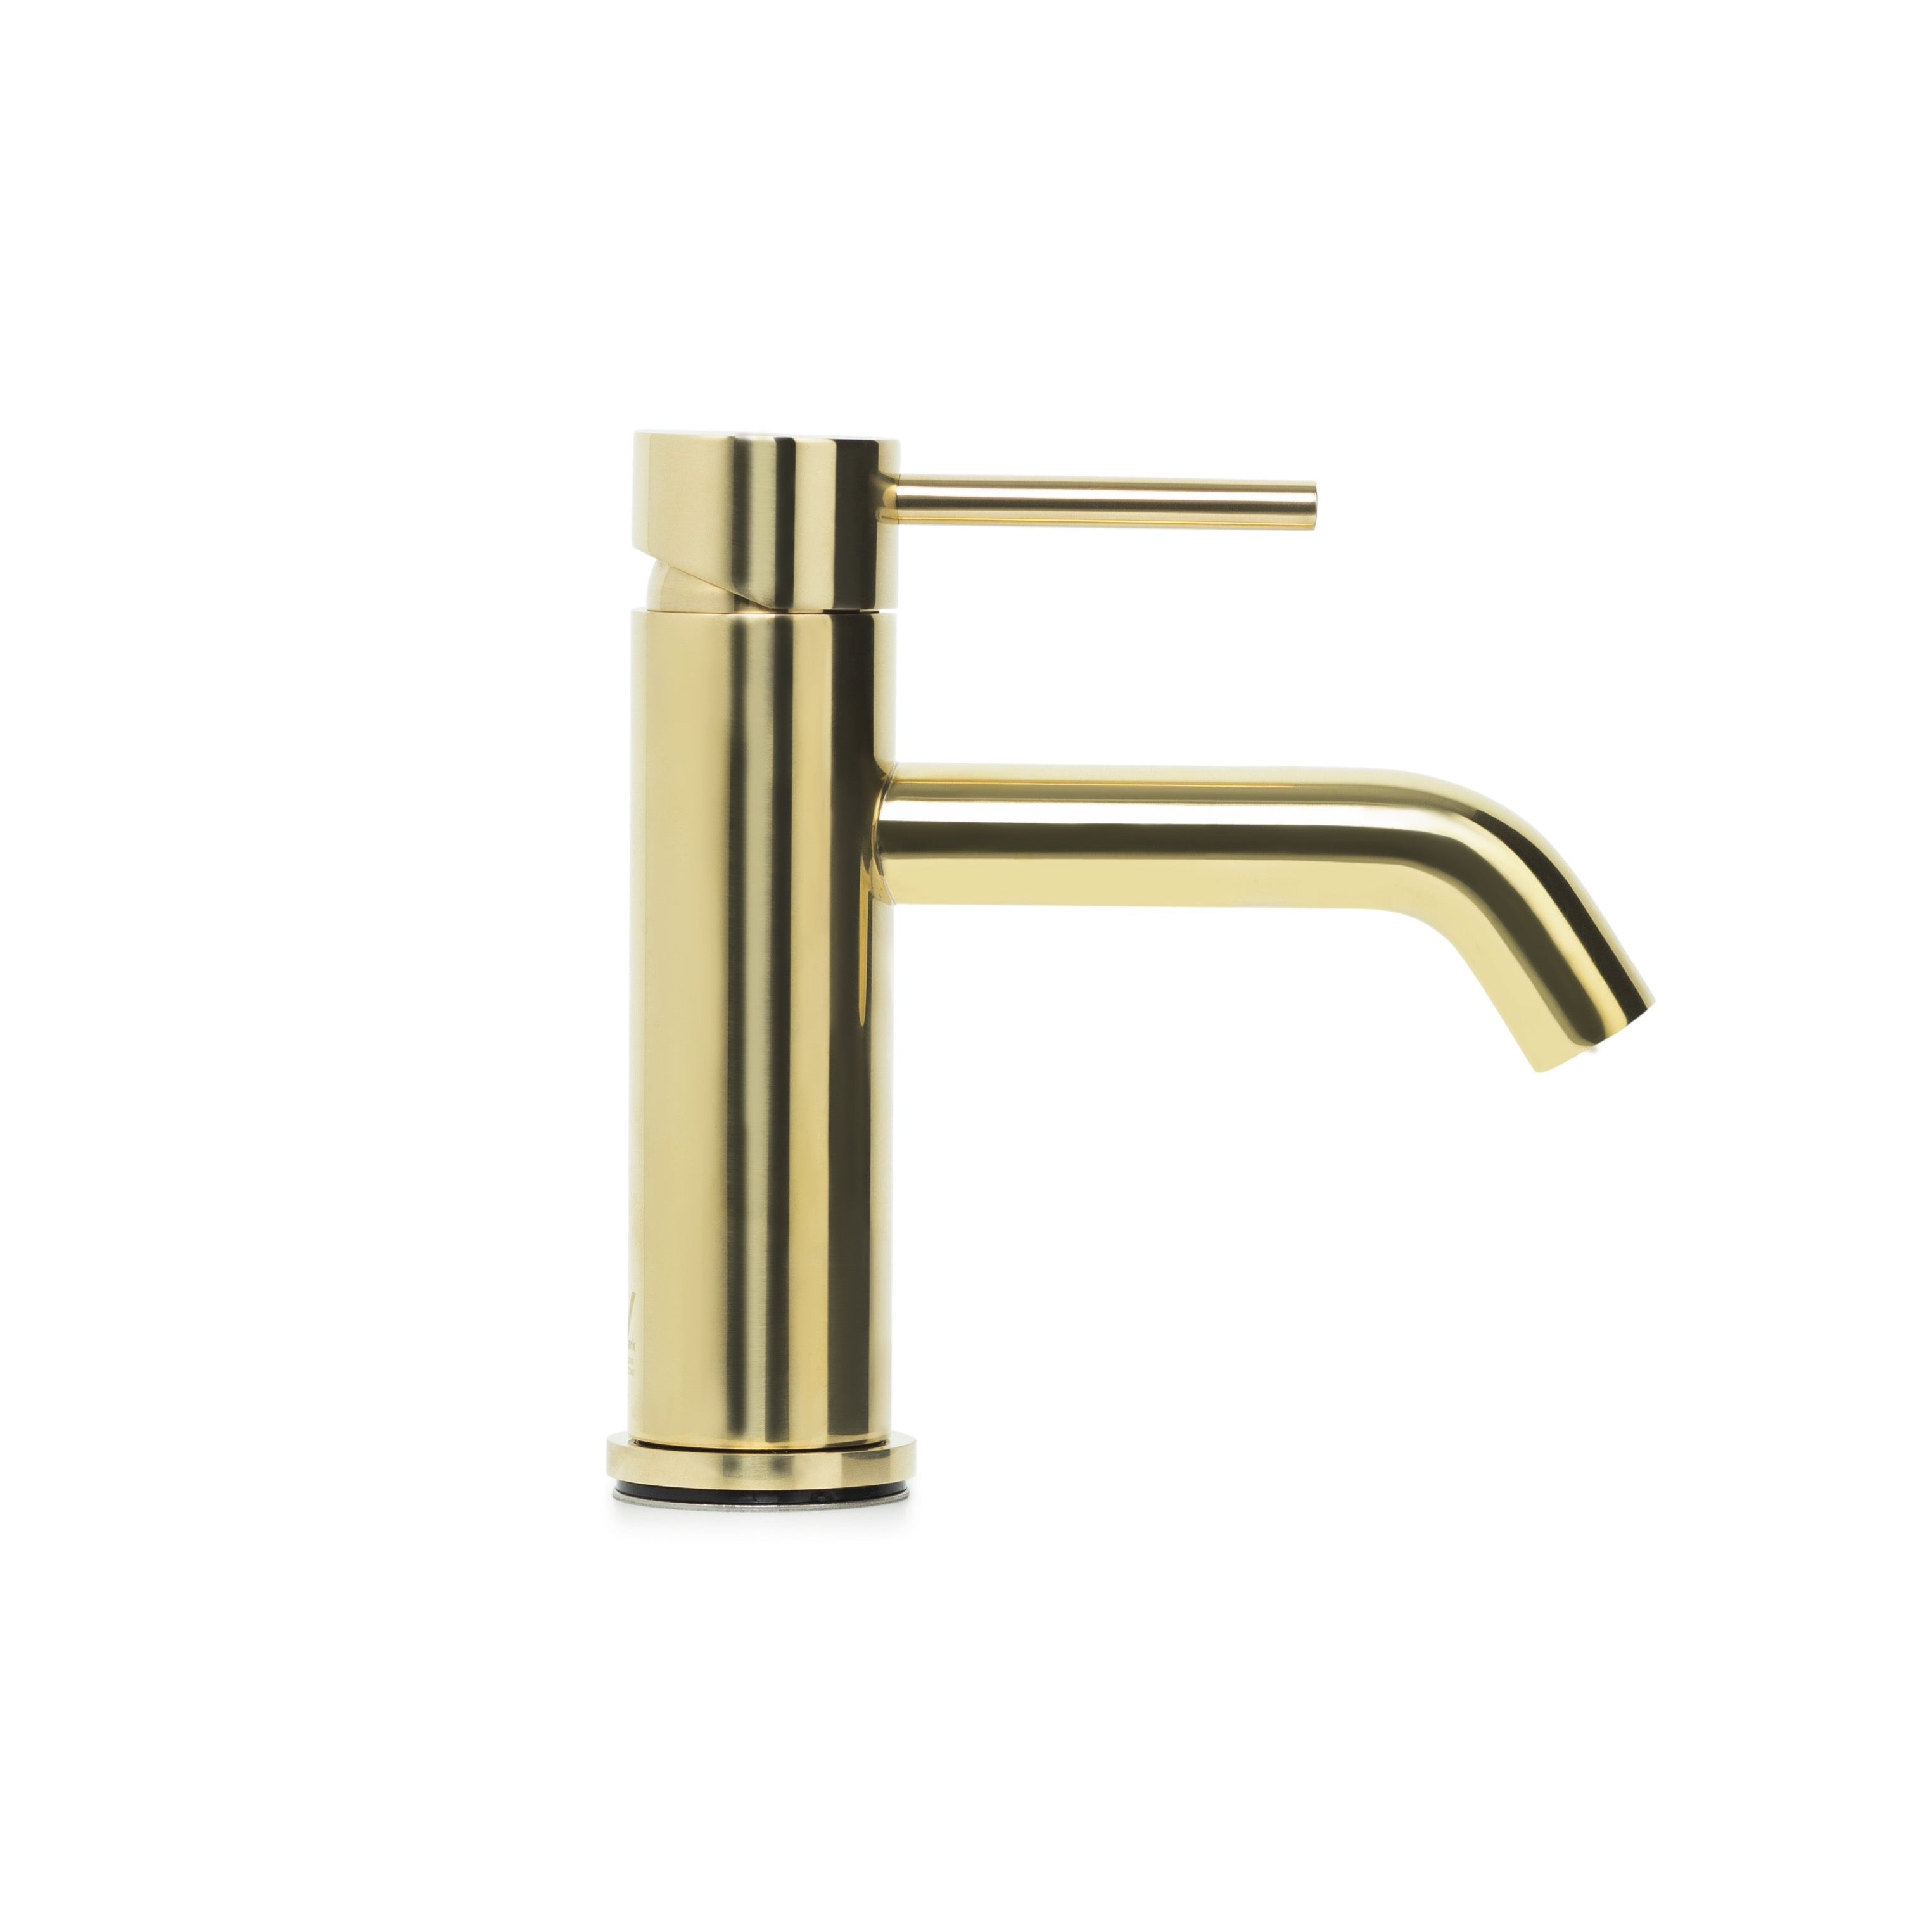 Bondi Pin Lever Basin Mixer with Curved Spout in Raw Brass